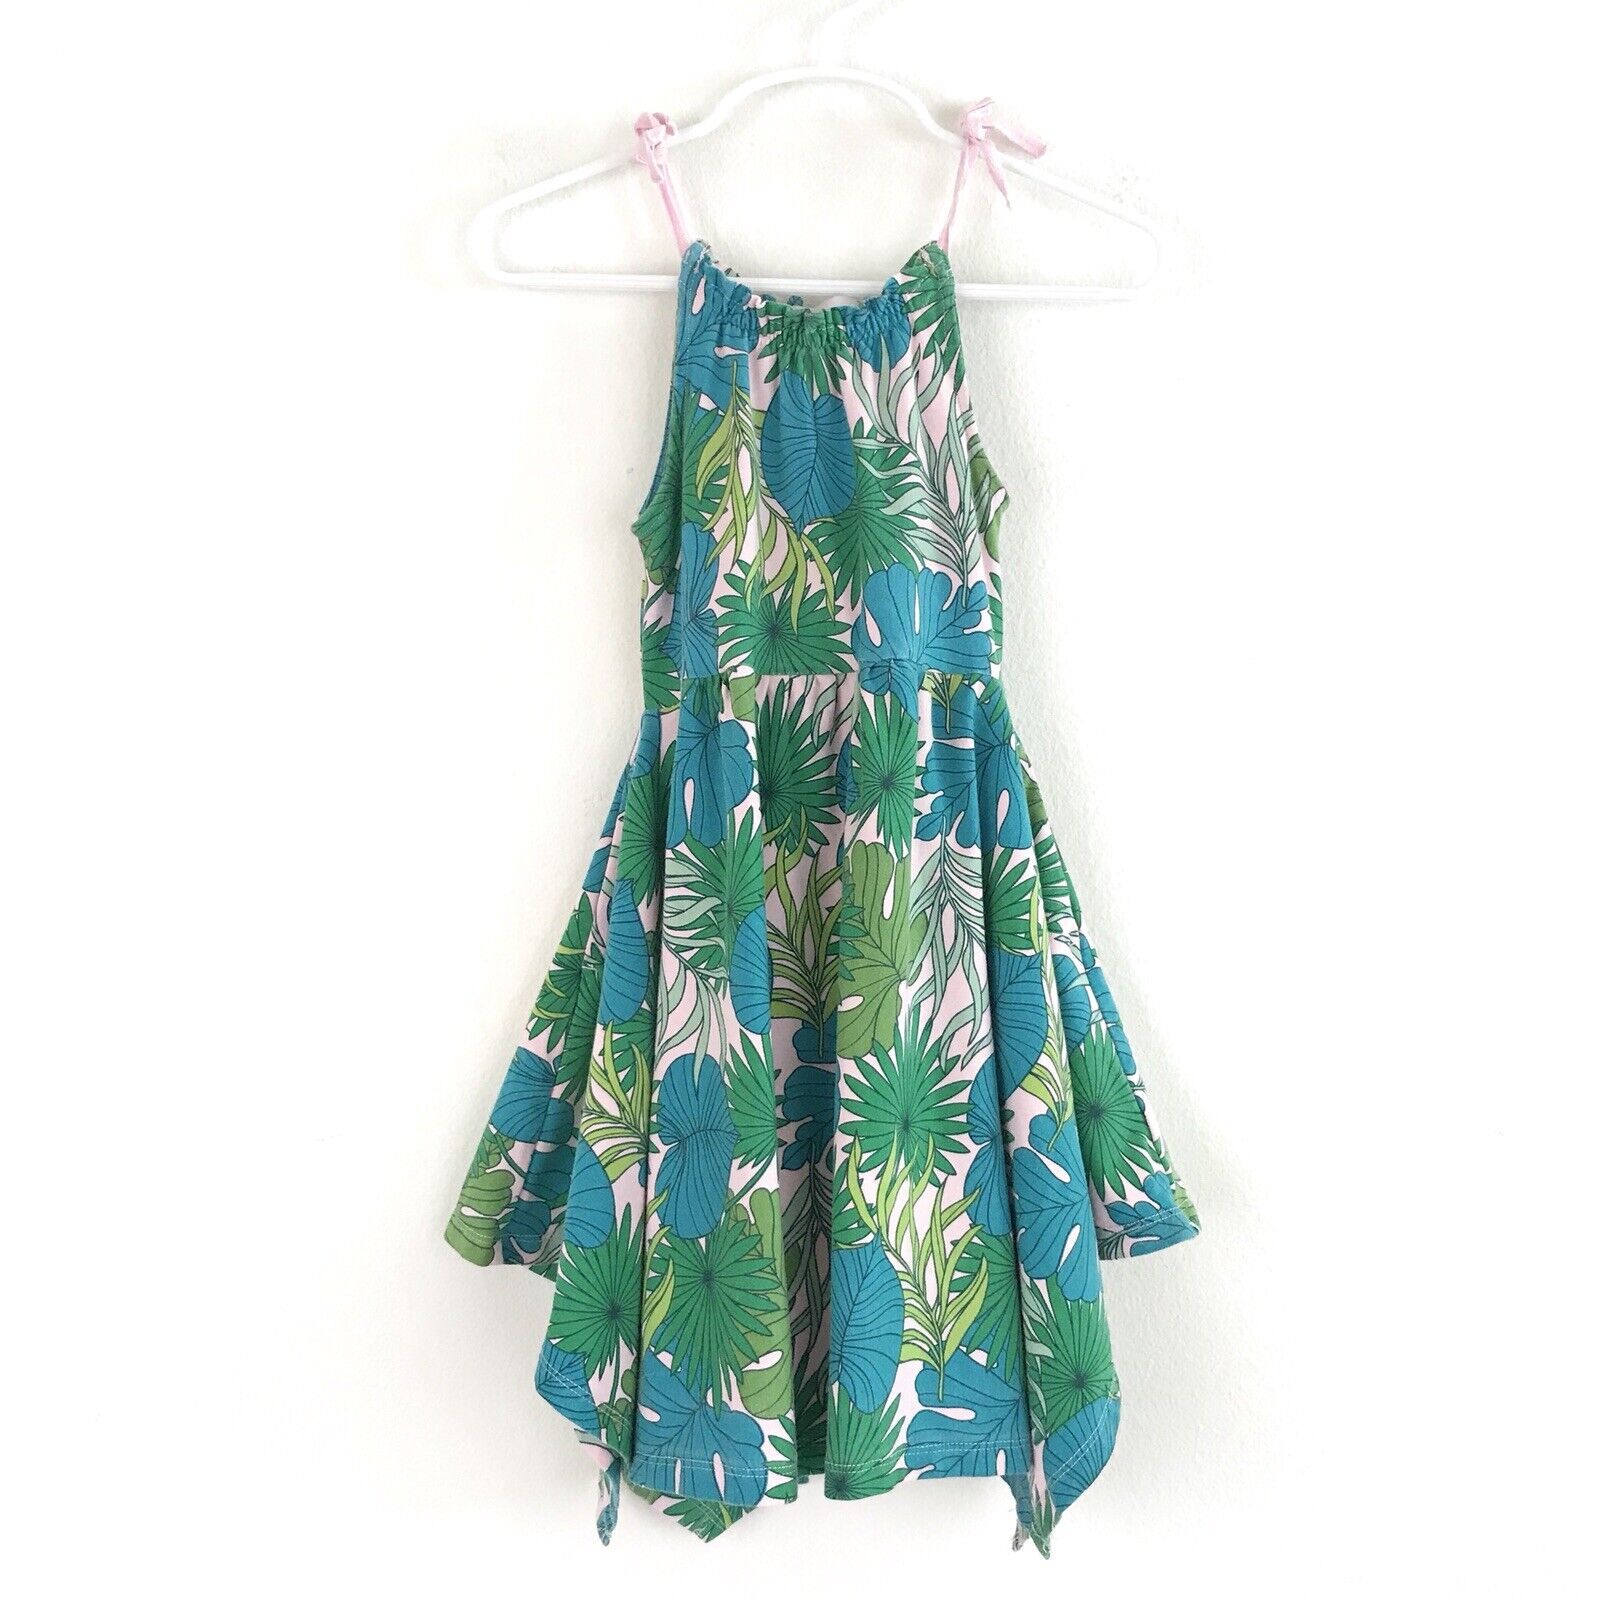 Tommy Bahama Kids Challenge the lowest price of Japan ☆ Toddler Girls Tropical Y Dress Palm Leaves Under blast sales Sun